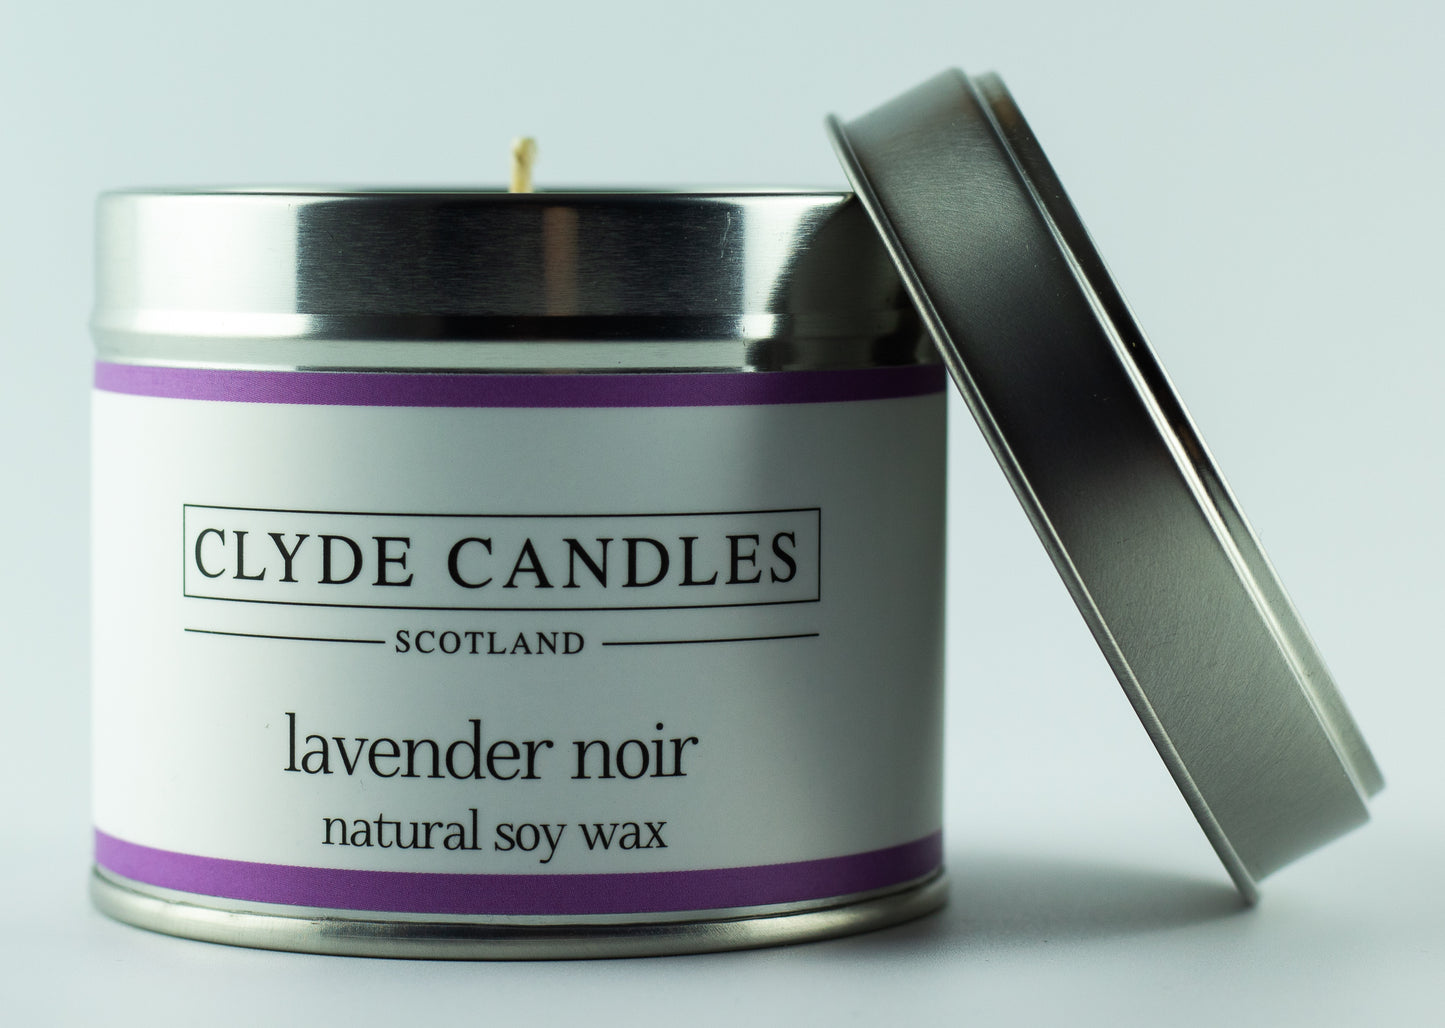 Lavender Noir Candle Tin Natural Soy wax, Scottish Candles, Clyde Candles